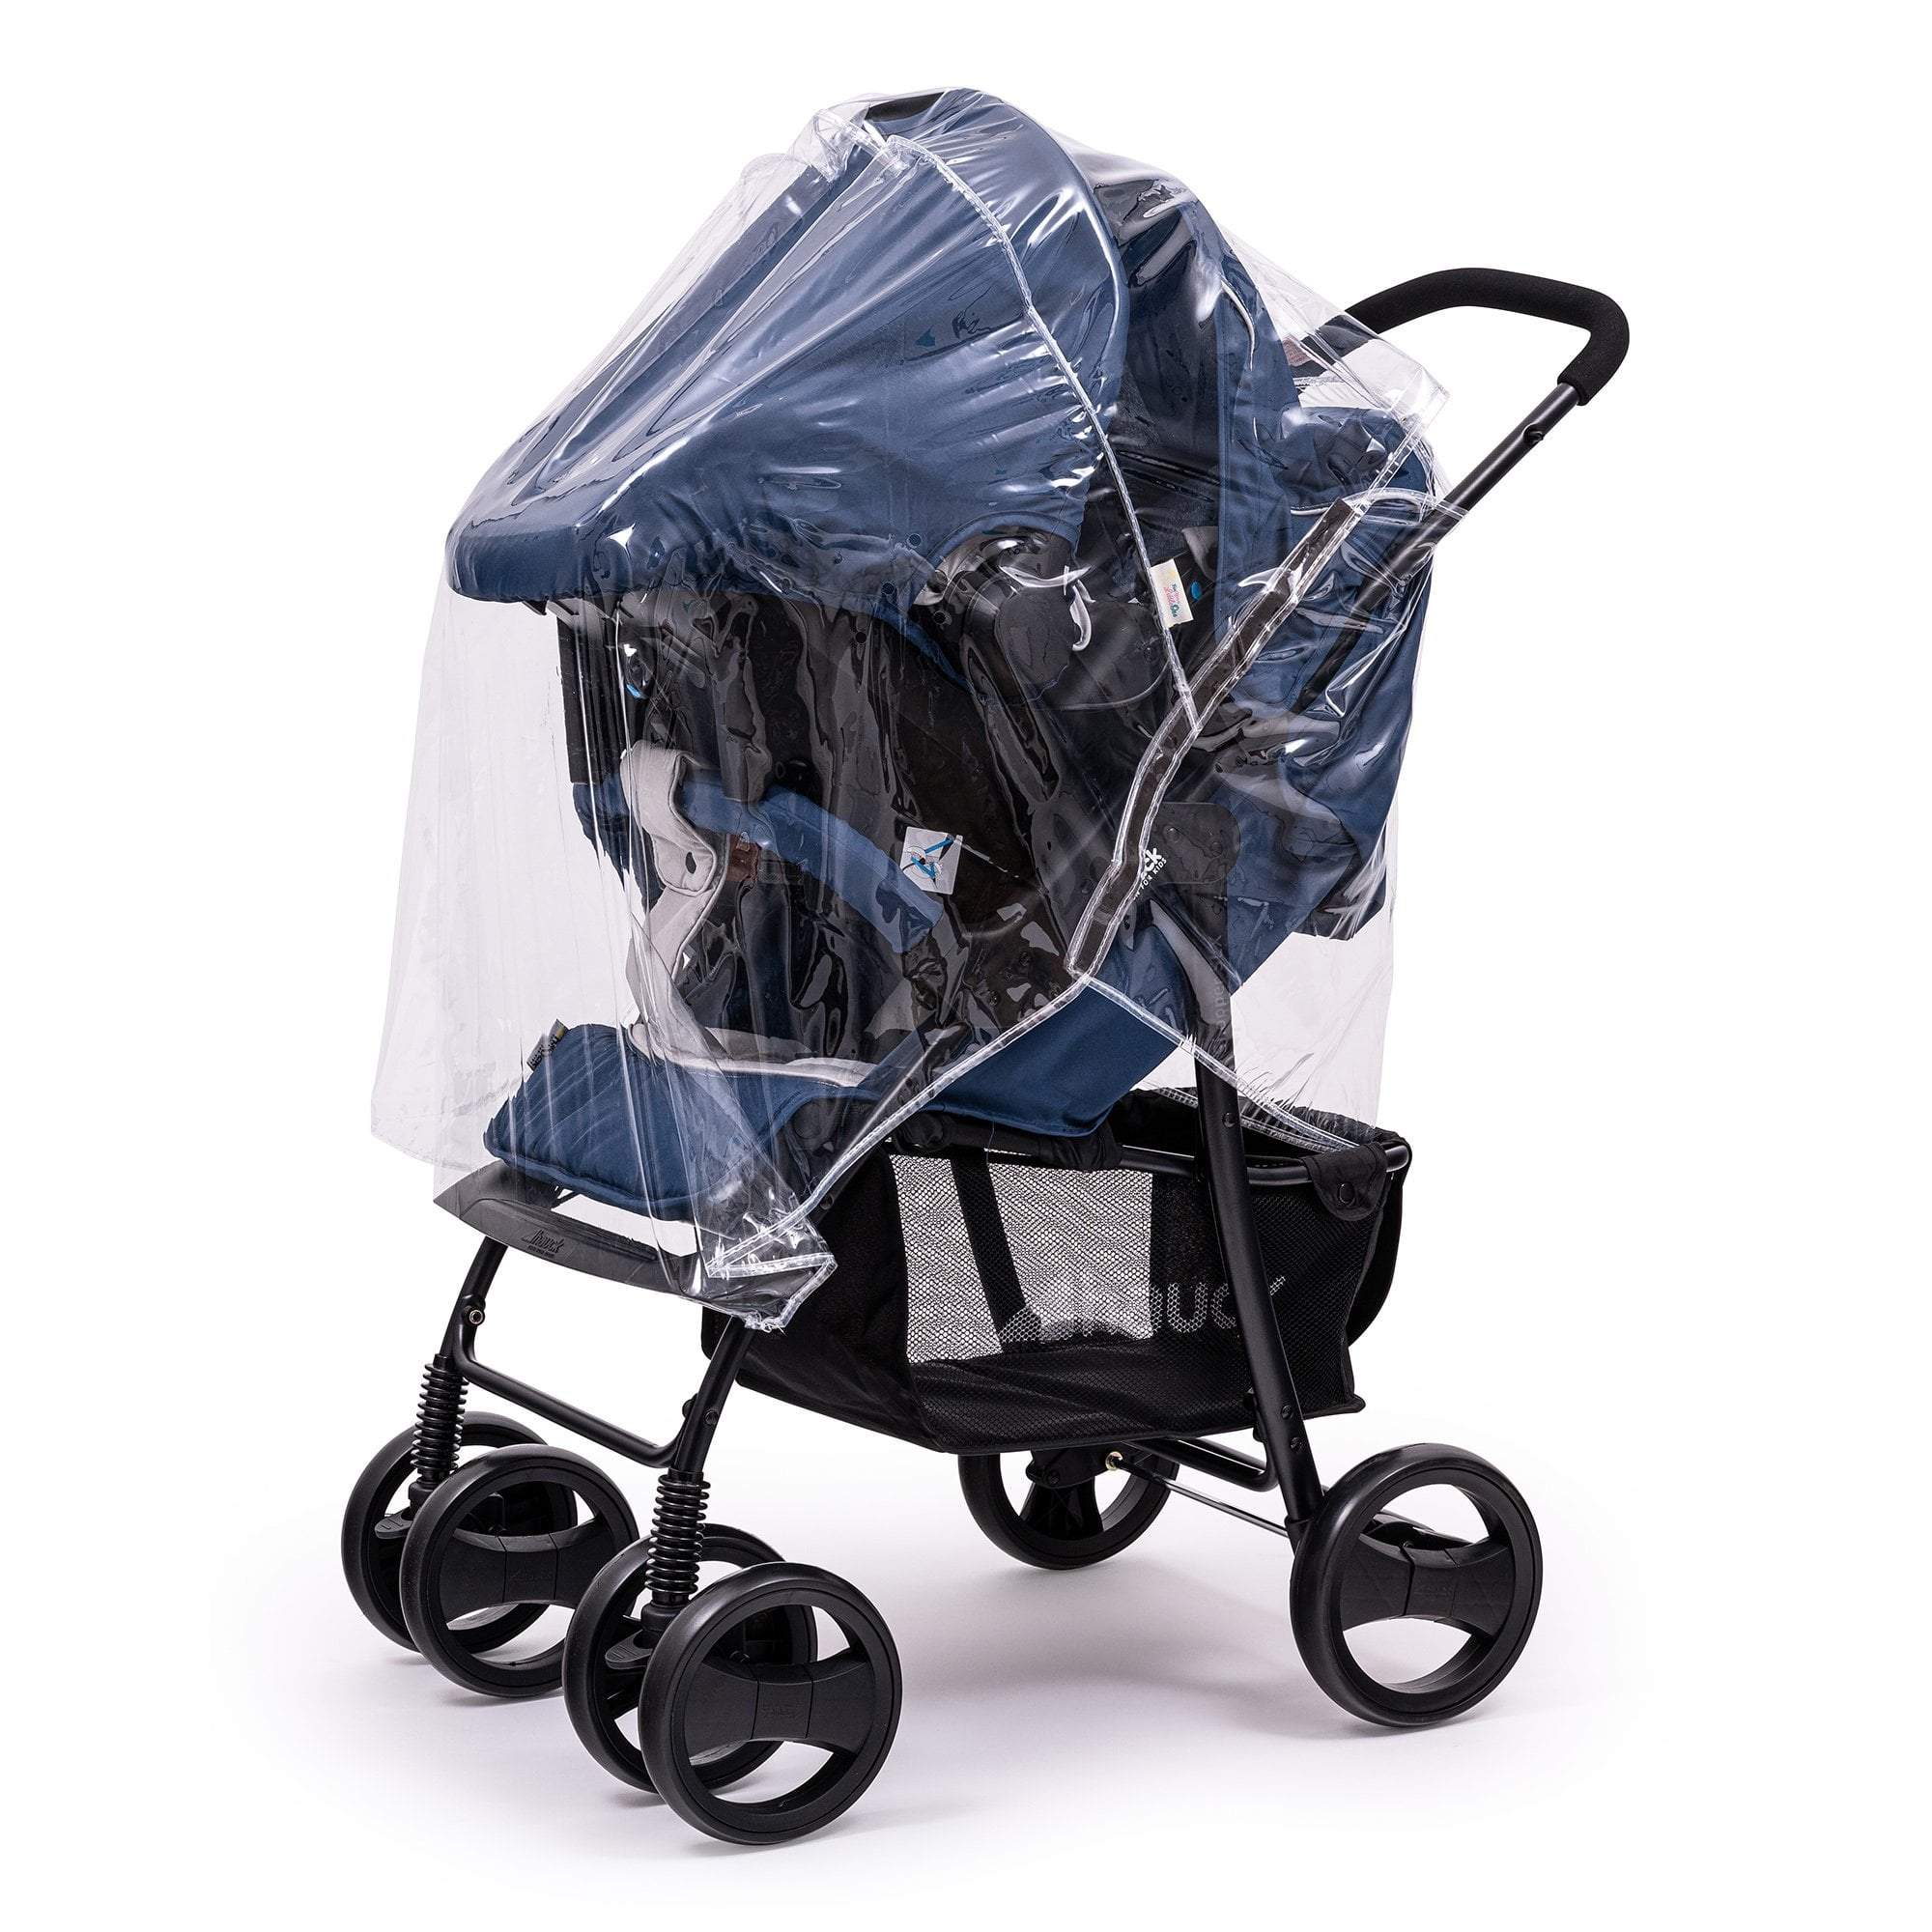 Travel System Raincover Compatible with My Child - Fits All Models - For Your Little One